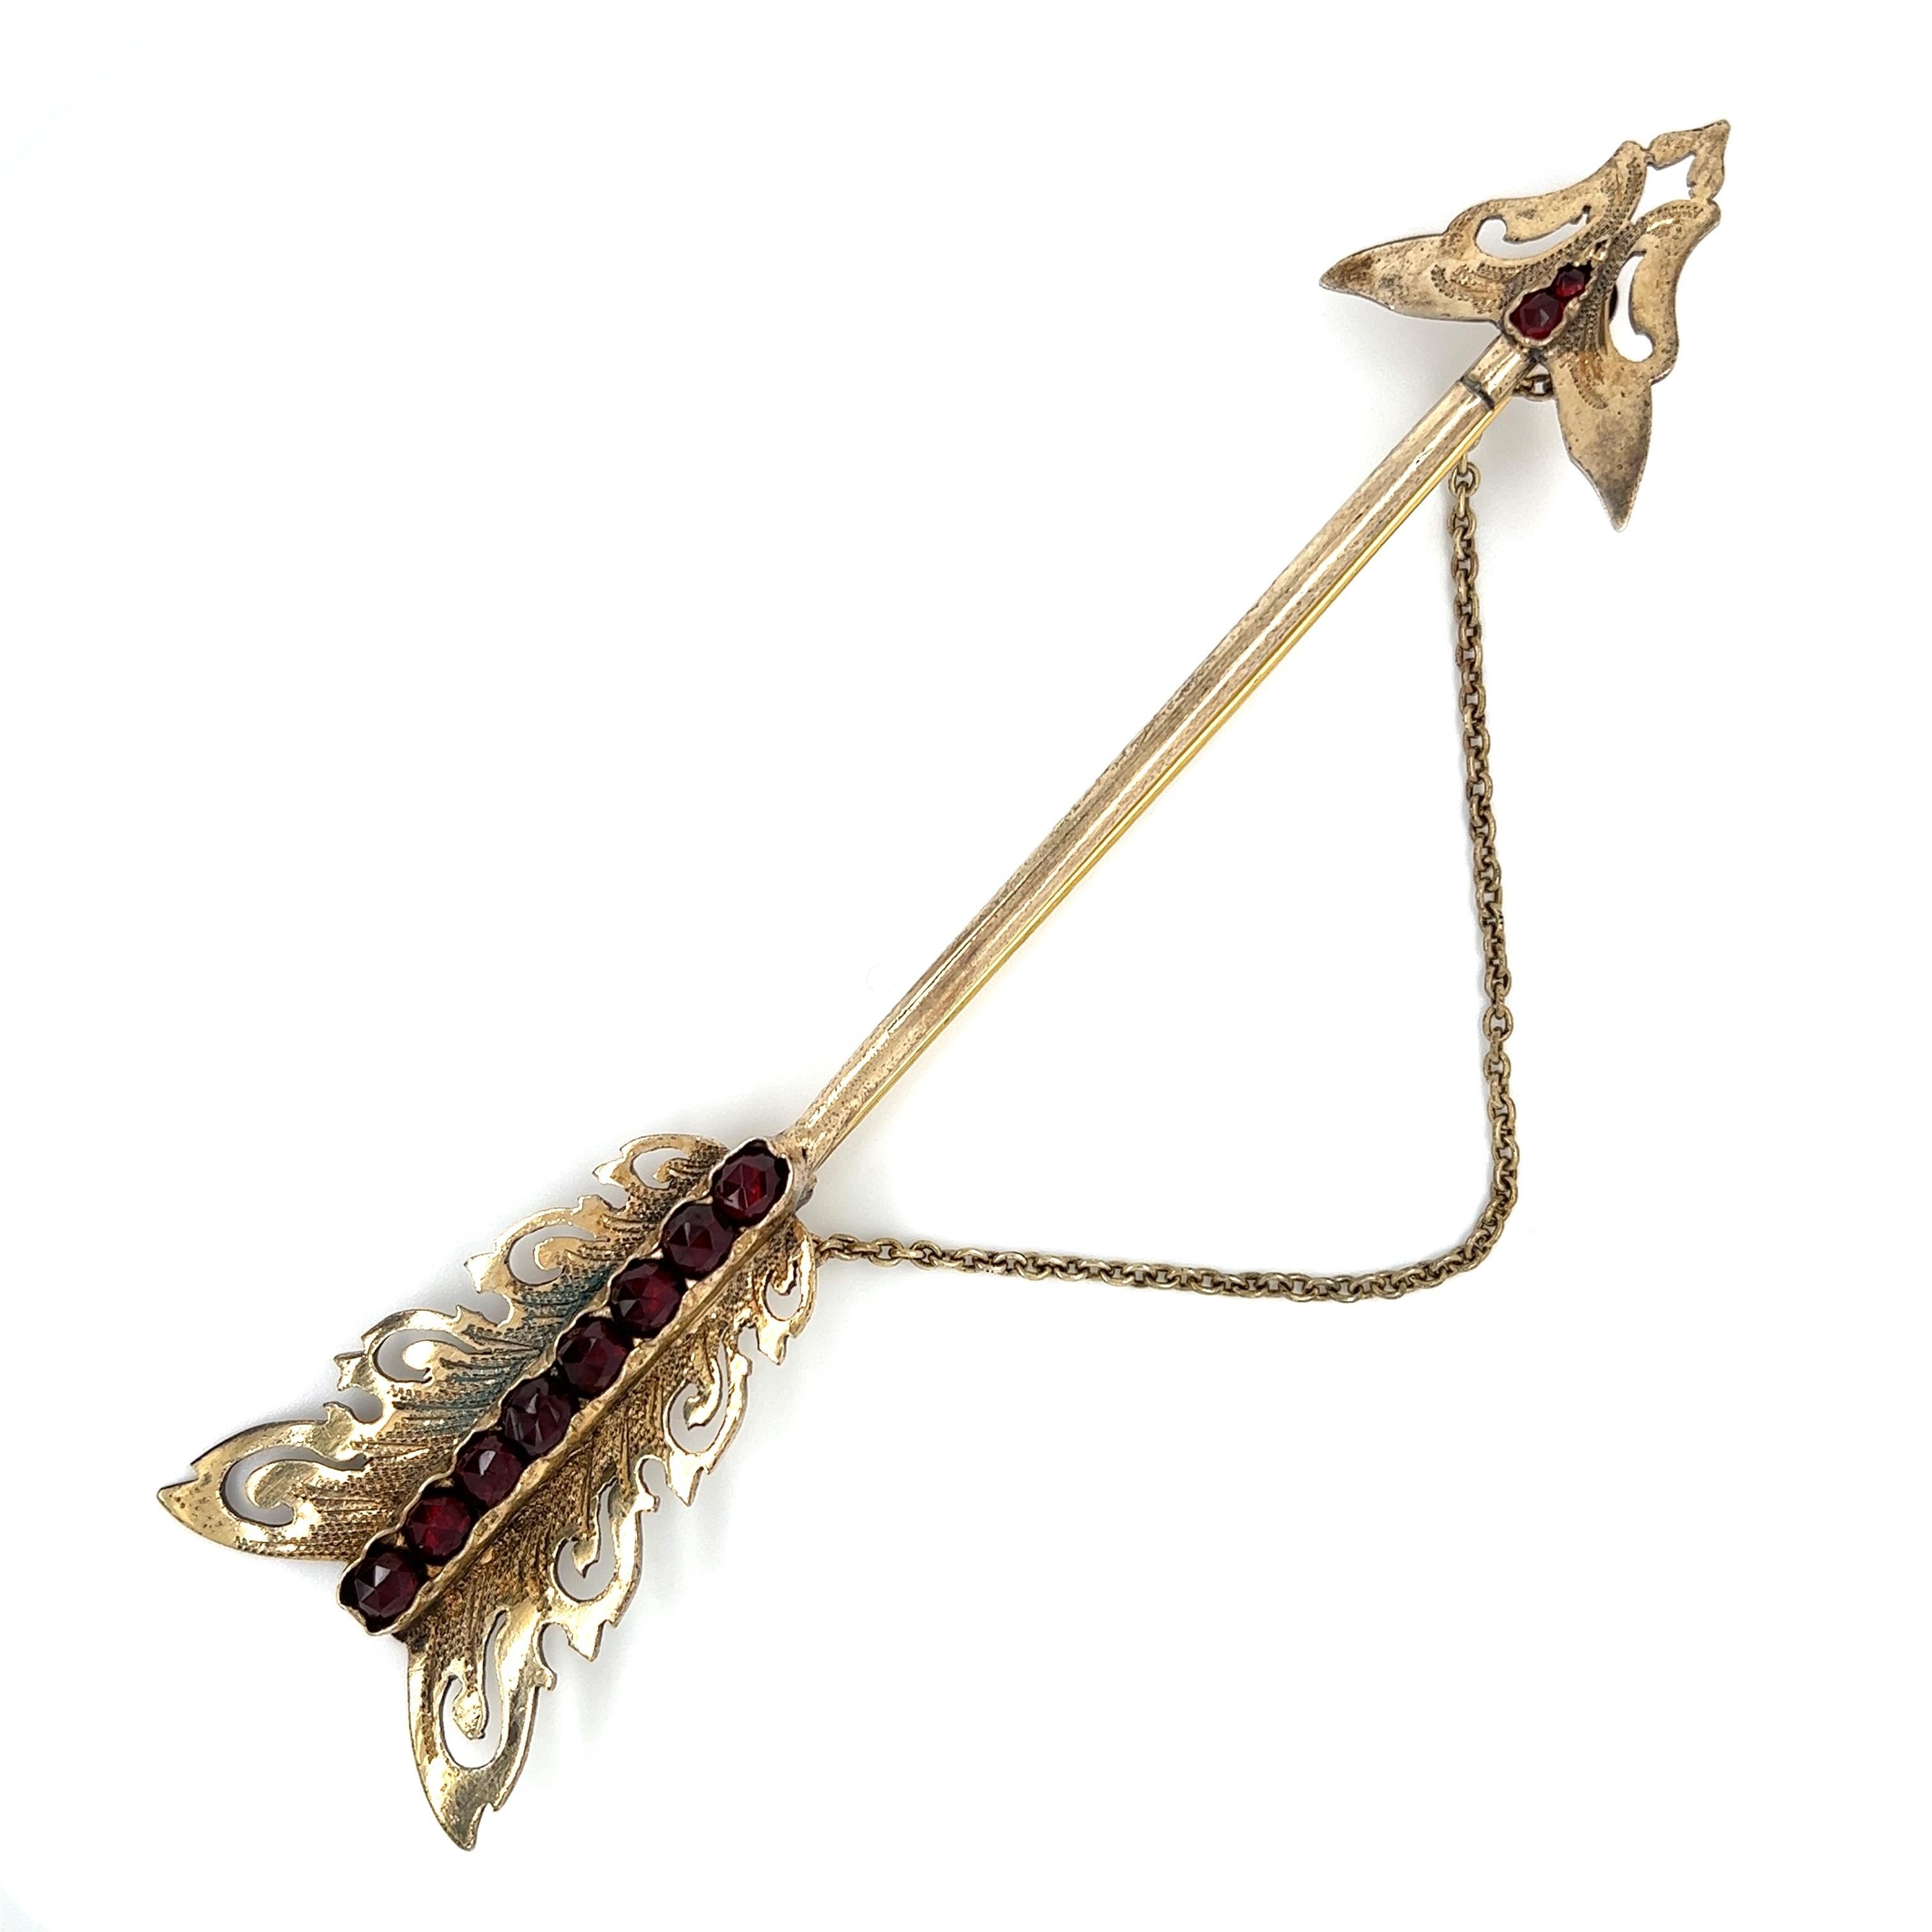 Simply Beautiful! Victorian Antique 12K Gold and Garnet Arrow Jabot Brooch Stick Pin. 12K Gold on Key and XRF. Pin closure is Brass. Centering Hand set Garnets. Approx. size: 5” Long. More Beautiful in real time...A sure to be admired piece you’ll